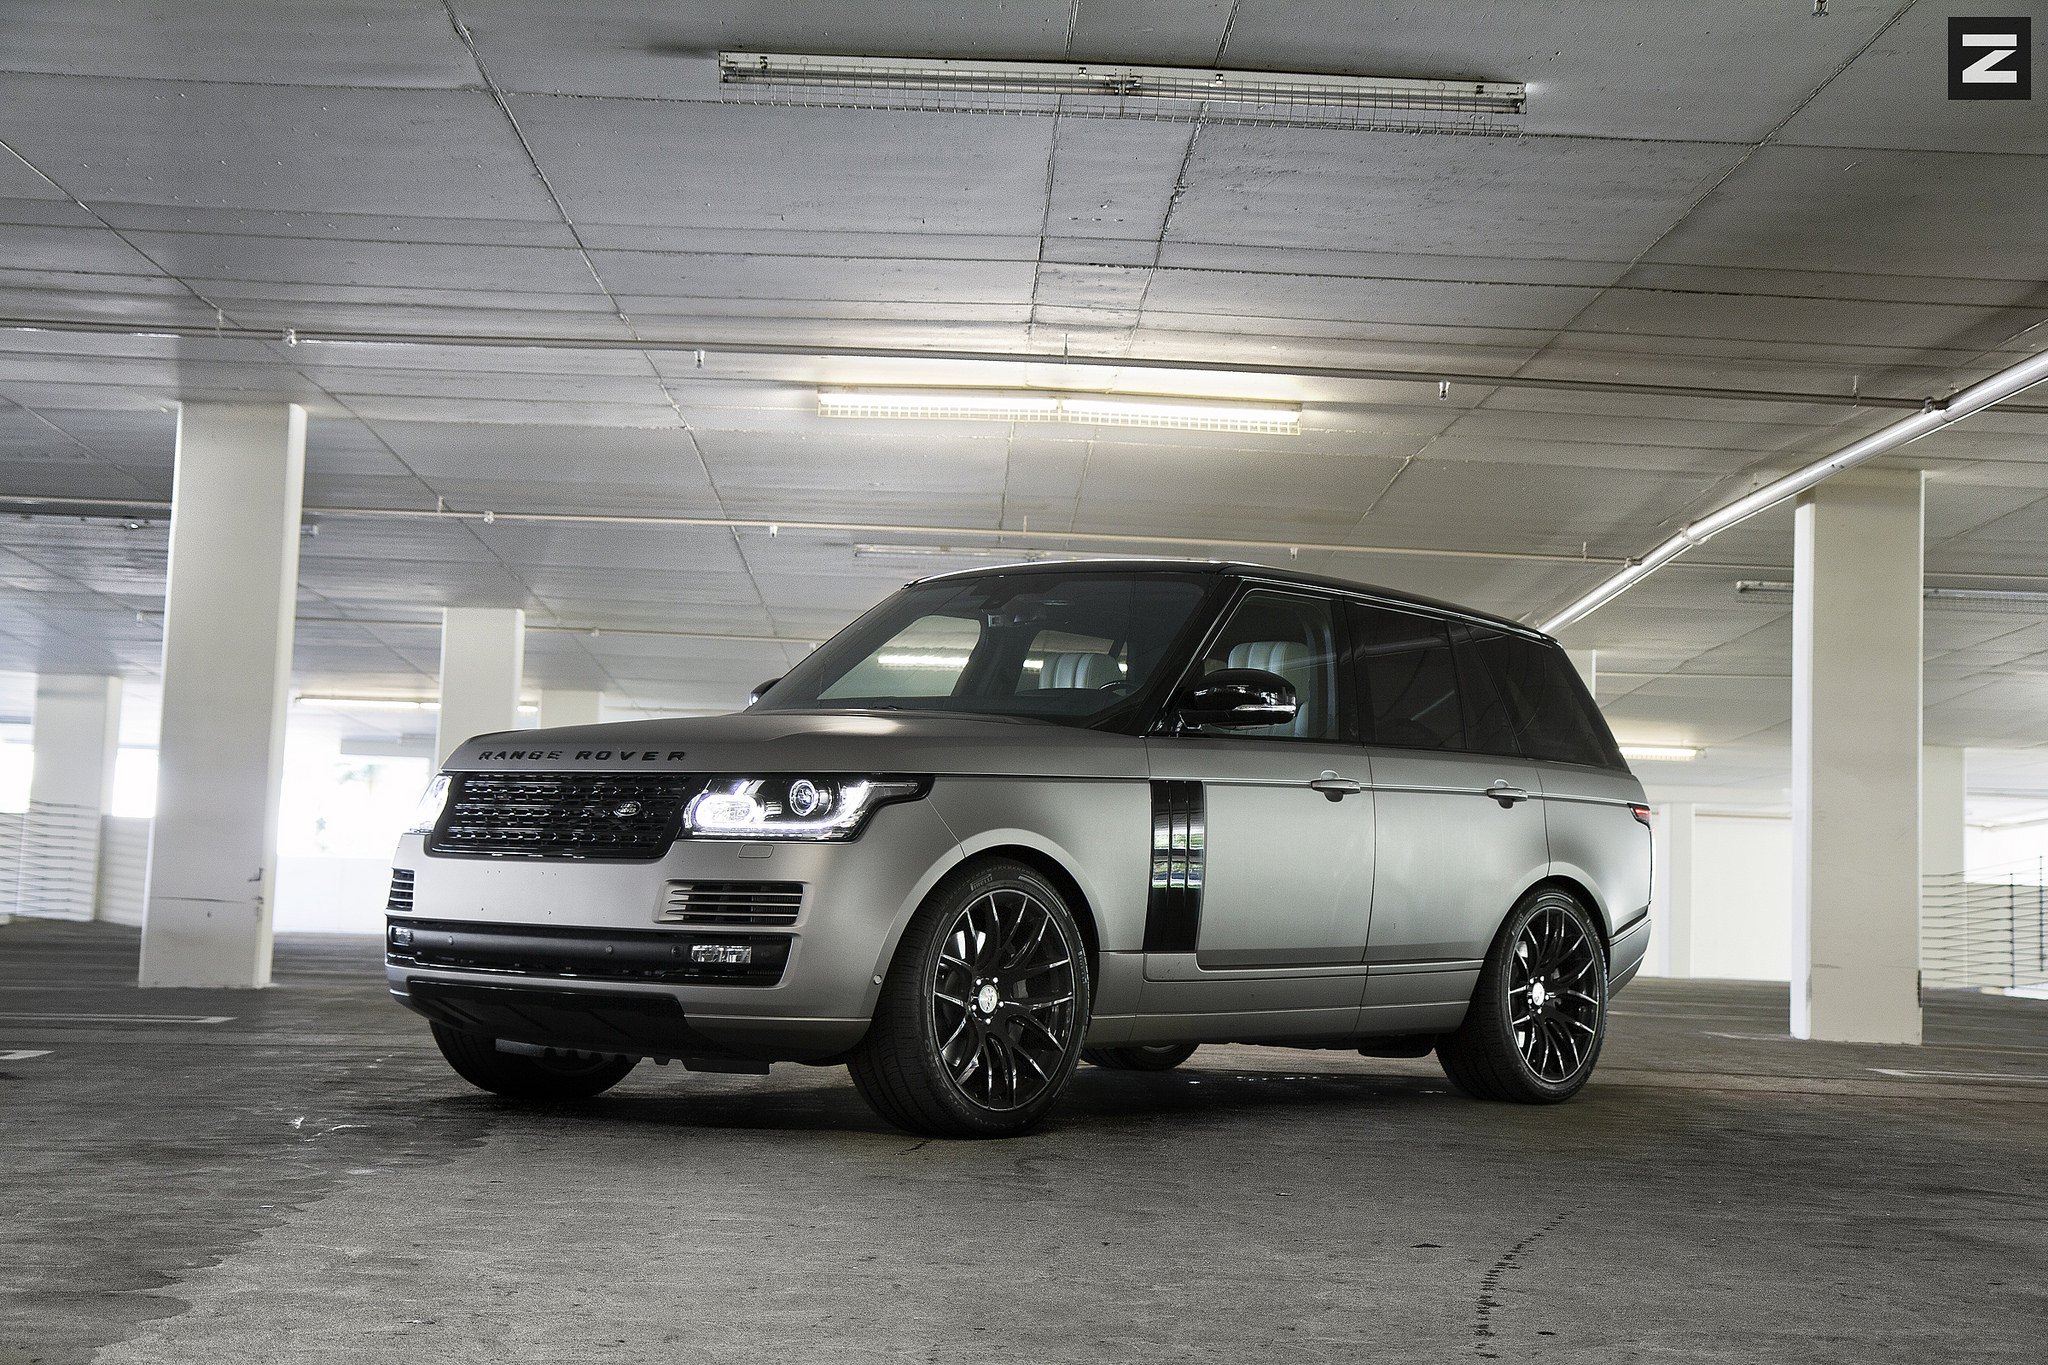 Gray Range Rover with Blacked Out Mesh Grille - Photo by Zito Wheels